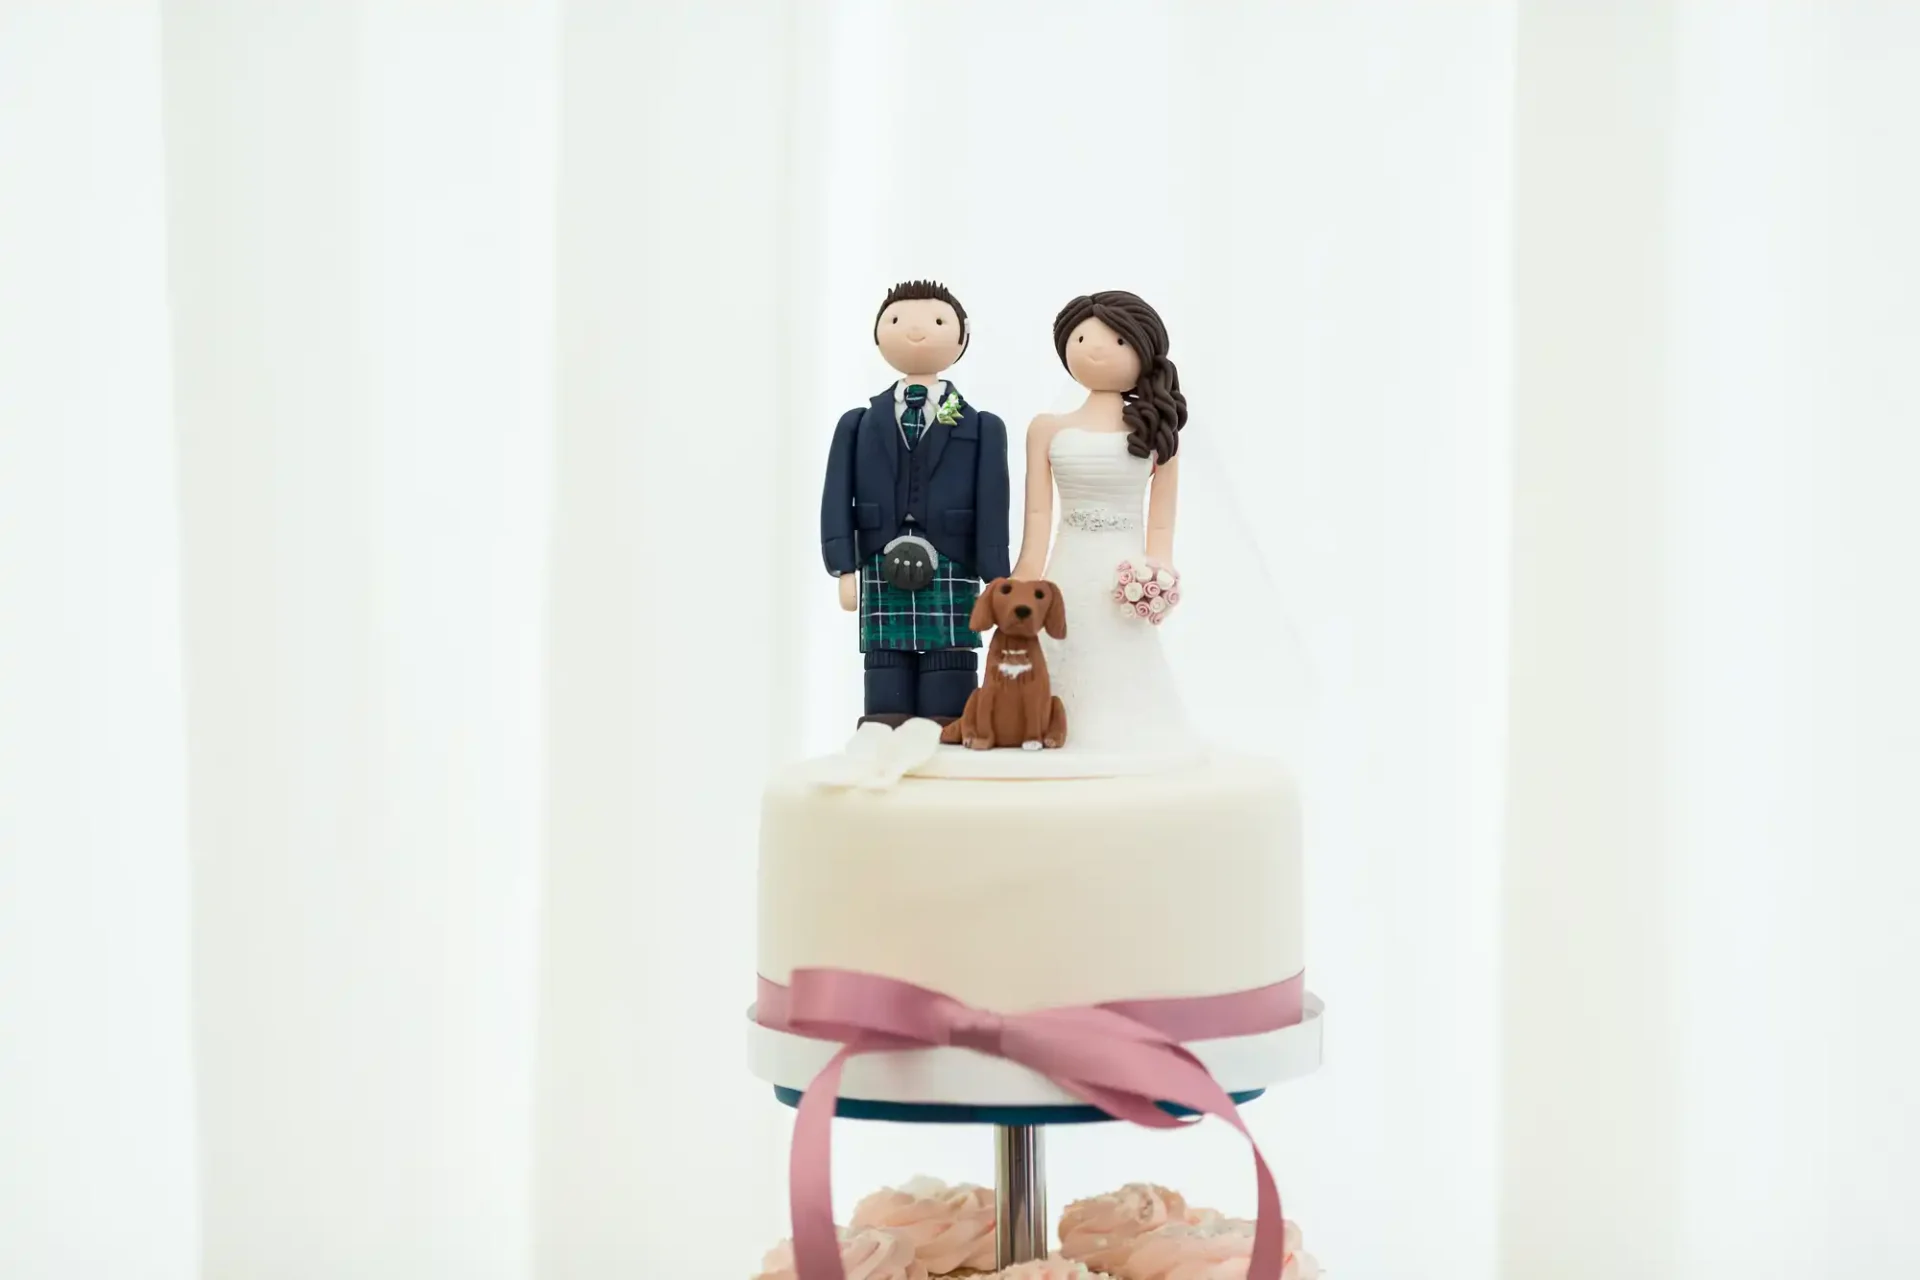 Wedding cake topper featuring figurines of a bride, groom in a kilt, and a dog, on a white cake with a pink ribbon.